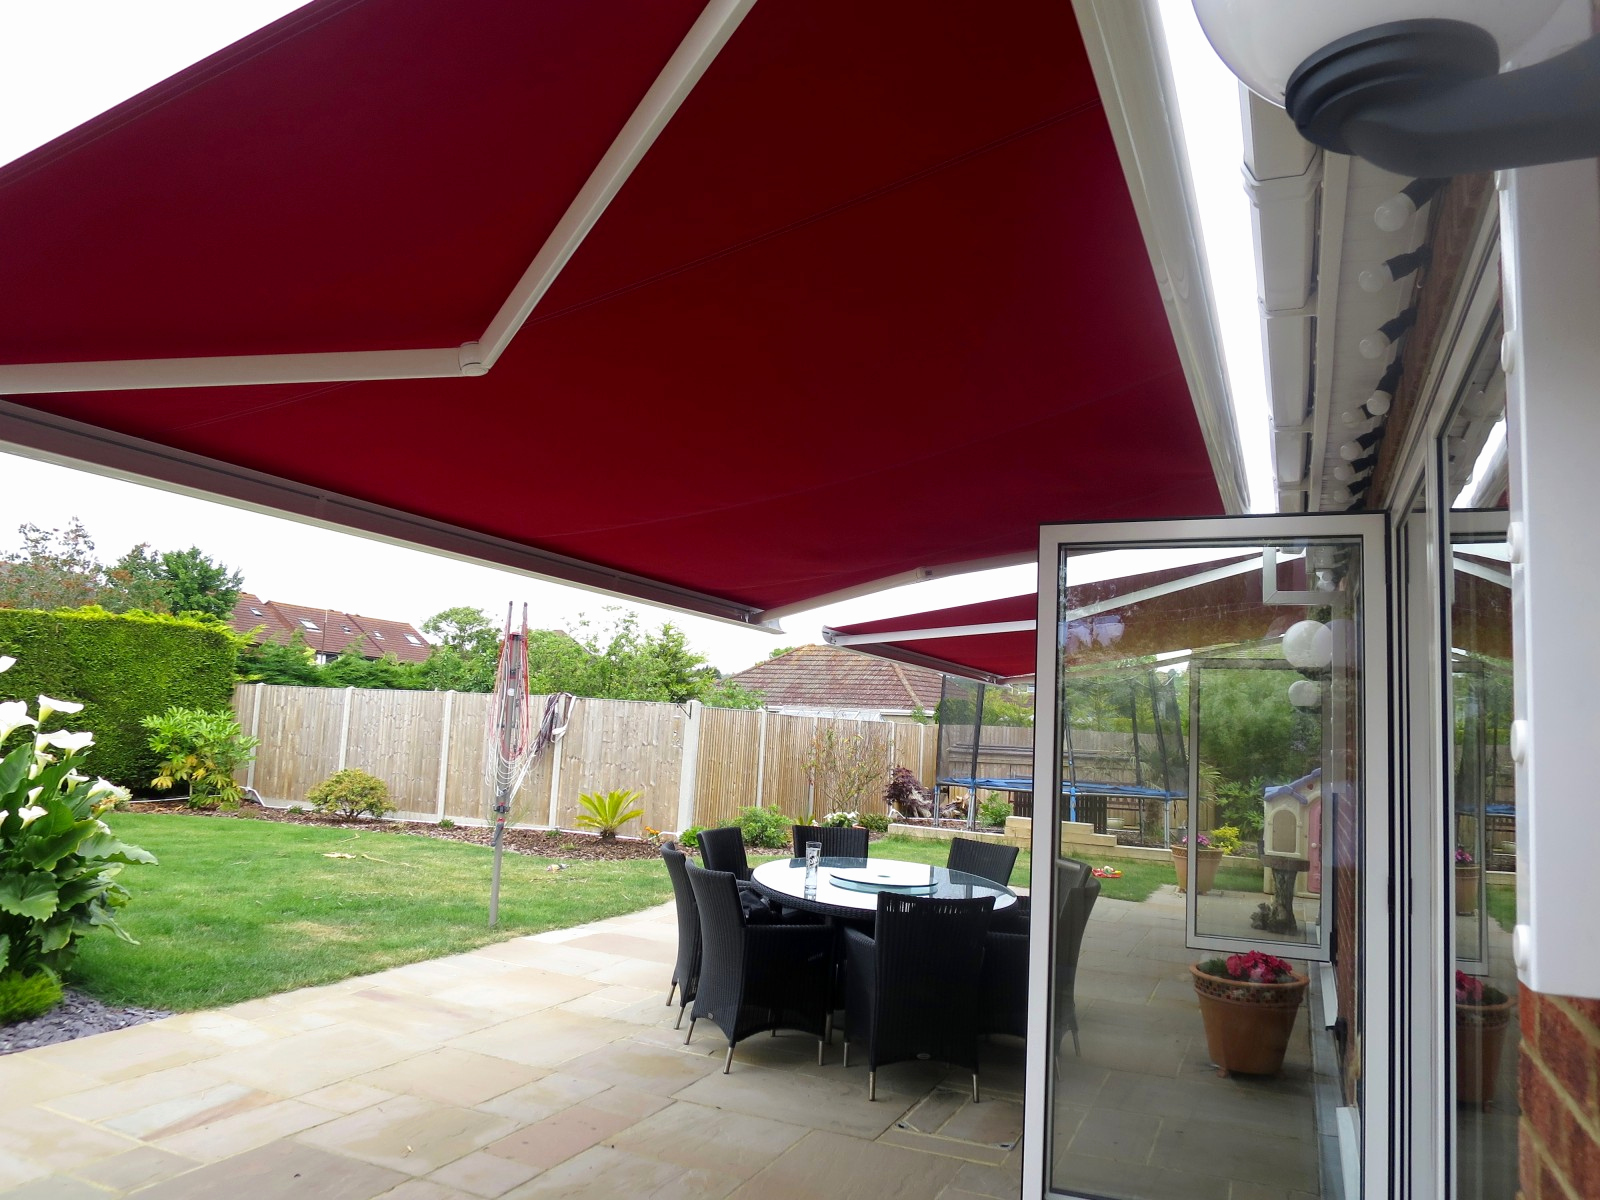 electric awning beautiful electric awnings fitted in porchester awningsouth HERVMVL